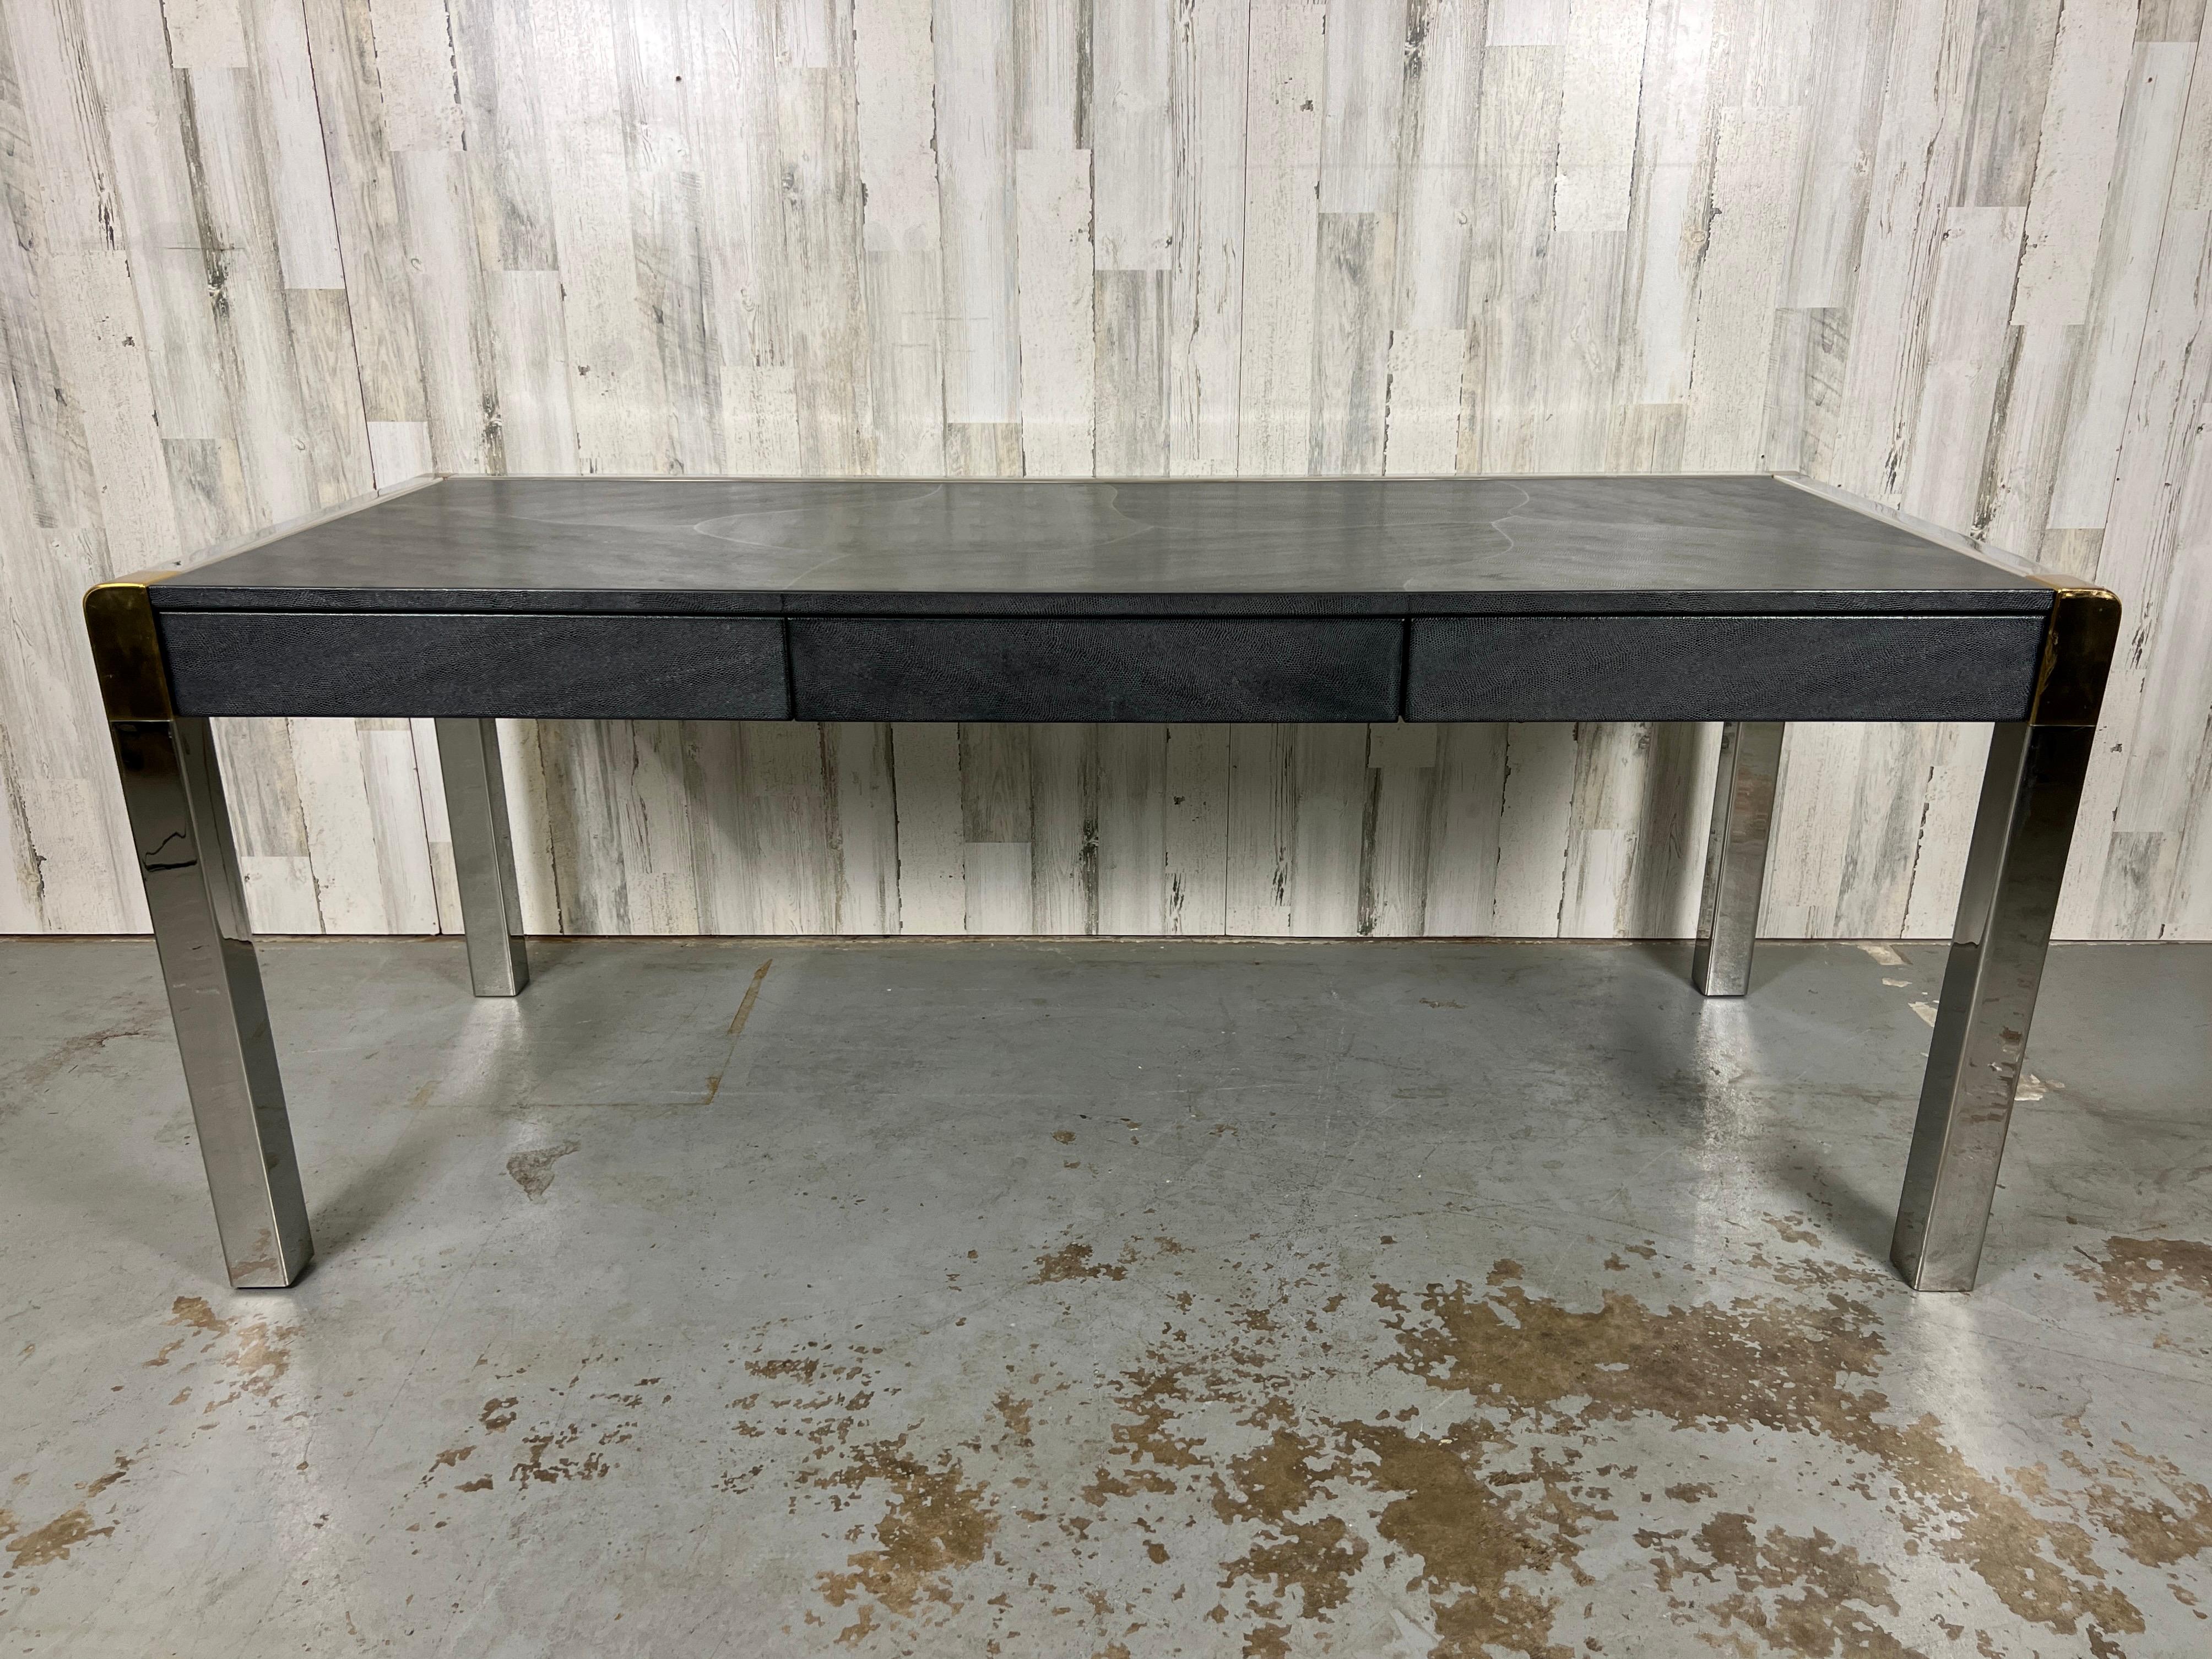 Extremely Rare Karl Springer Shagreen & chrome executive desk. Each corner has brass accents to compliment the chrome. Dark Shagreen top and drawers. A very classy and modern look! Original leather tag with signature and date on the bottom. Floor to